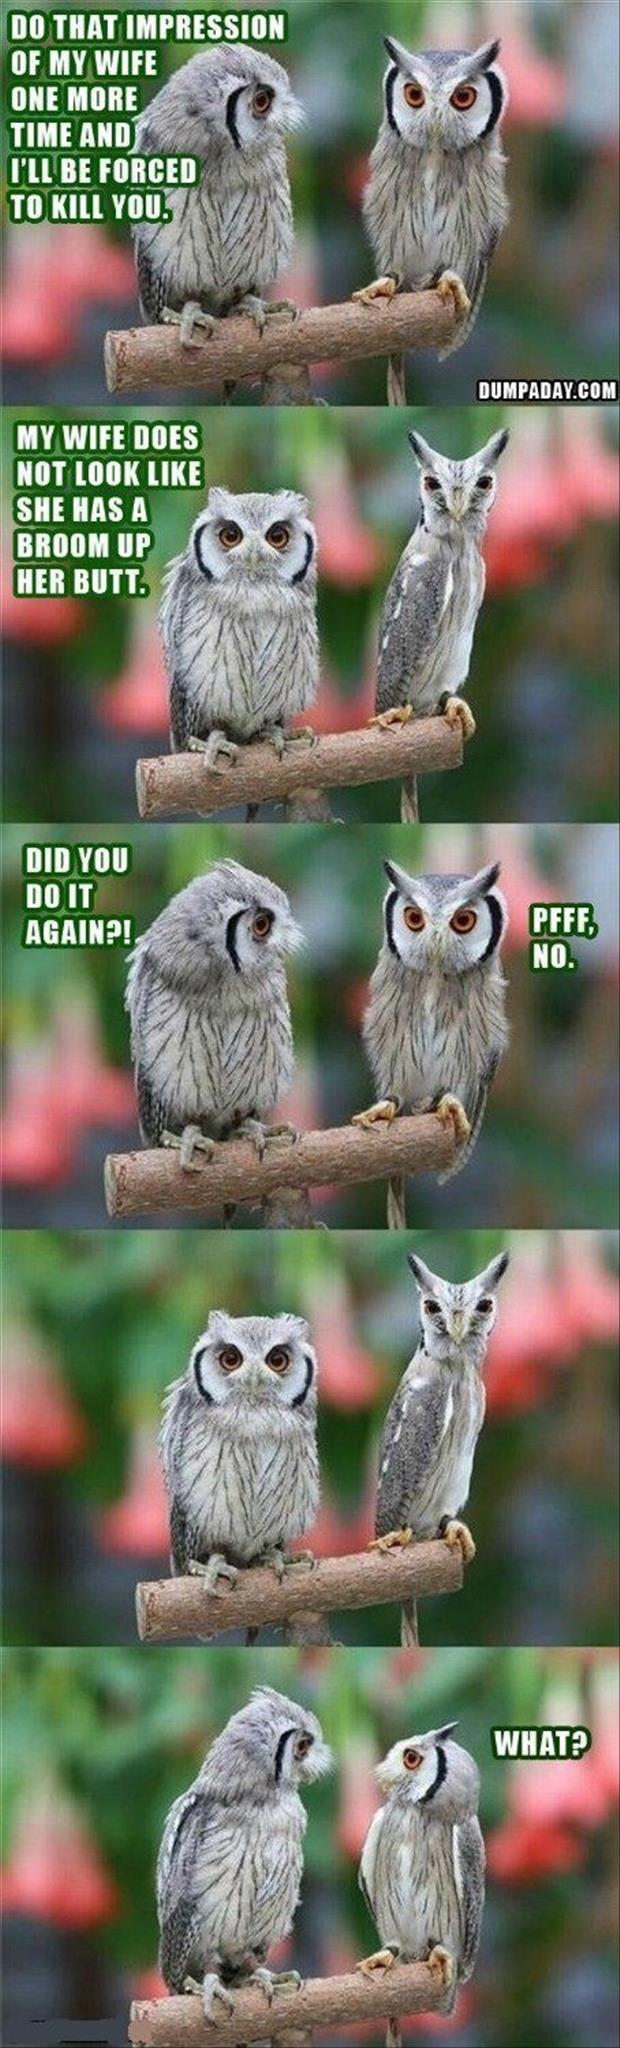 wow-the-owls-funny-pictures.jpg